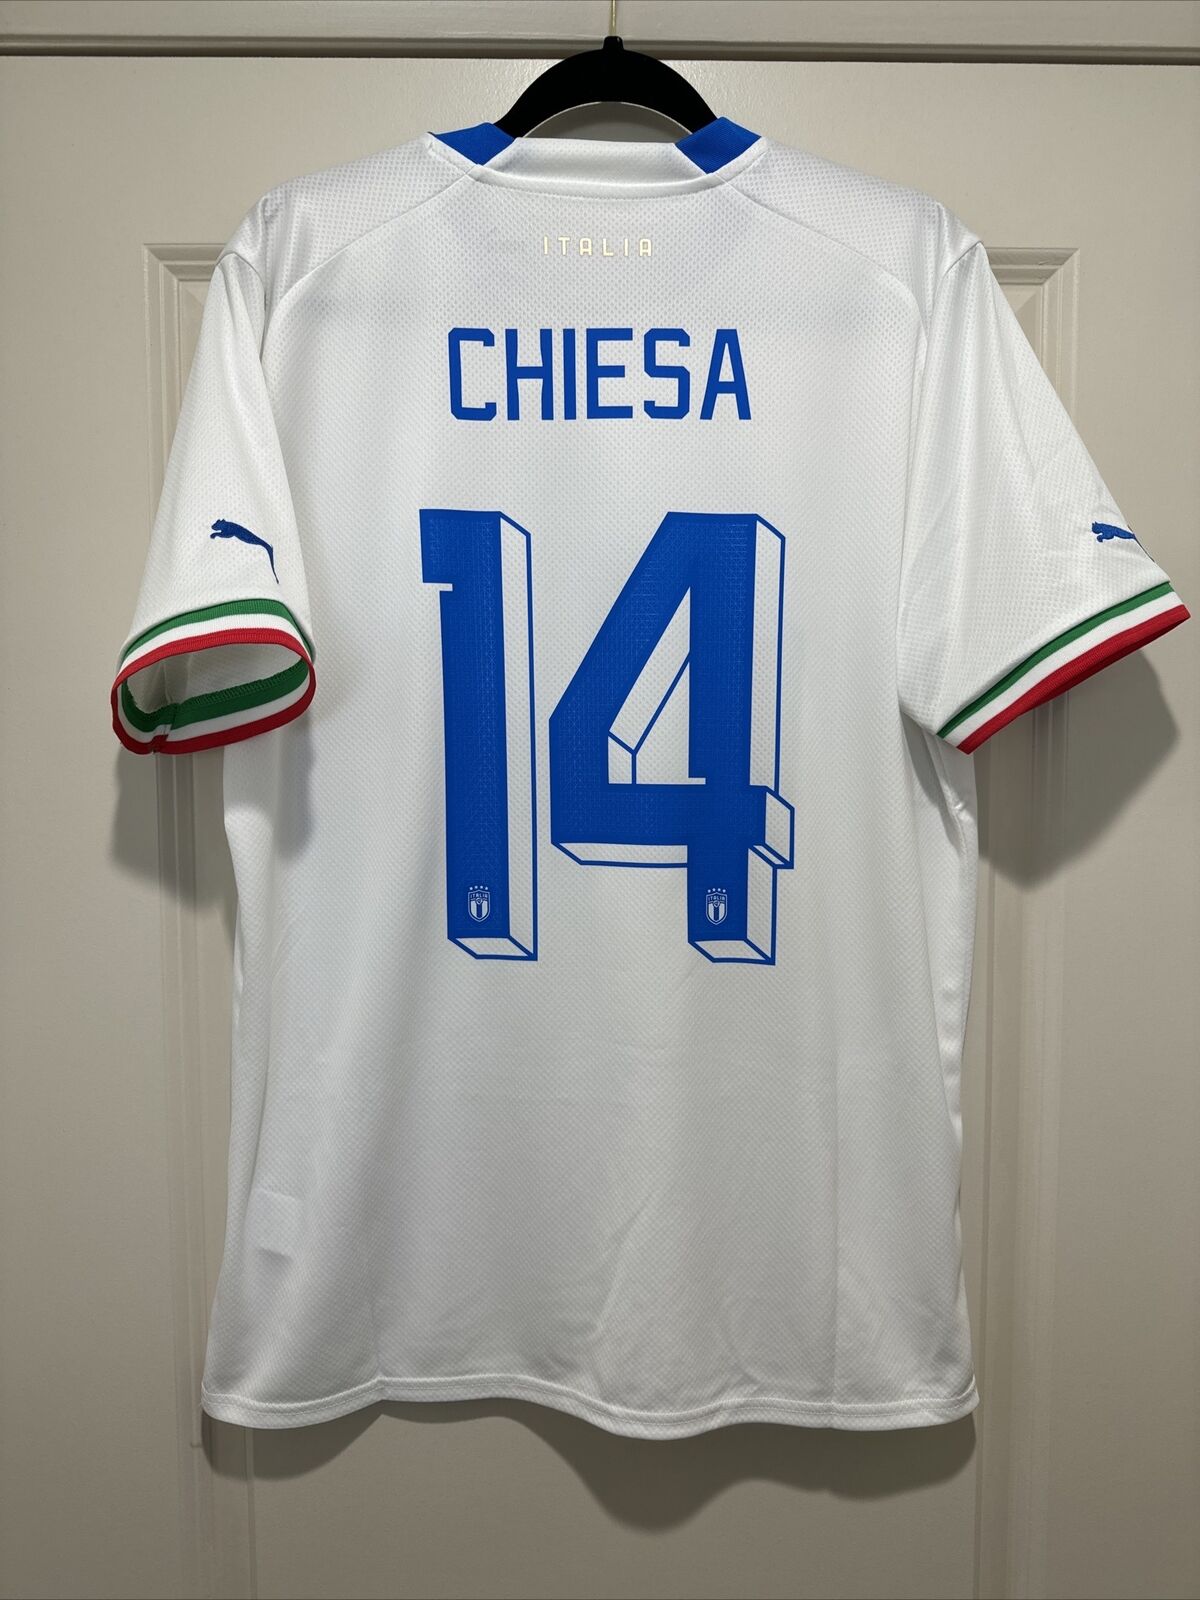 Federico Chiesa Italy National Team 2022/23 Away Adidas Fan Version Soccer Jersey - White